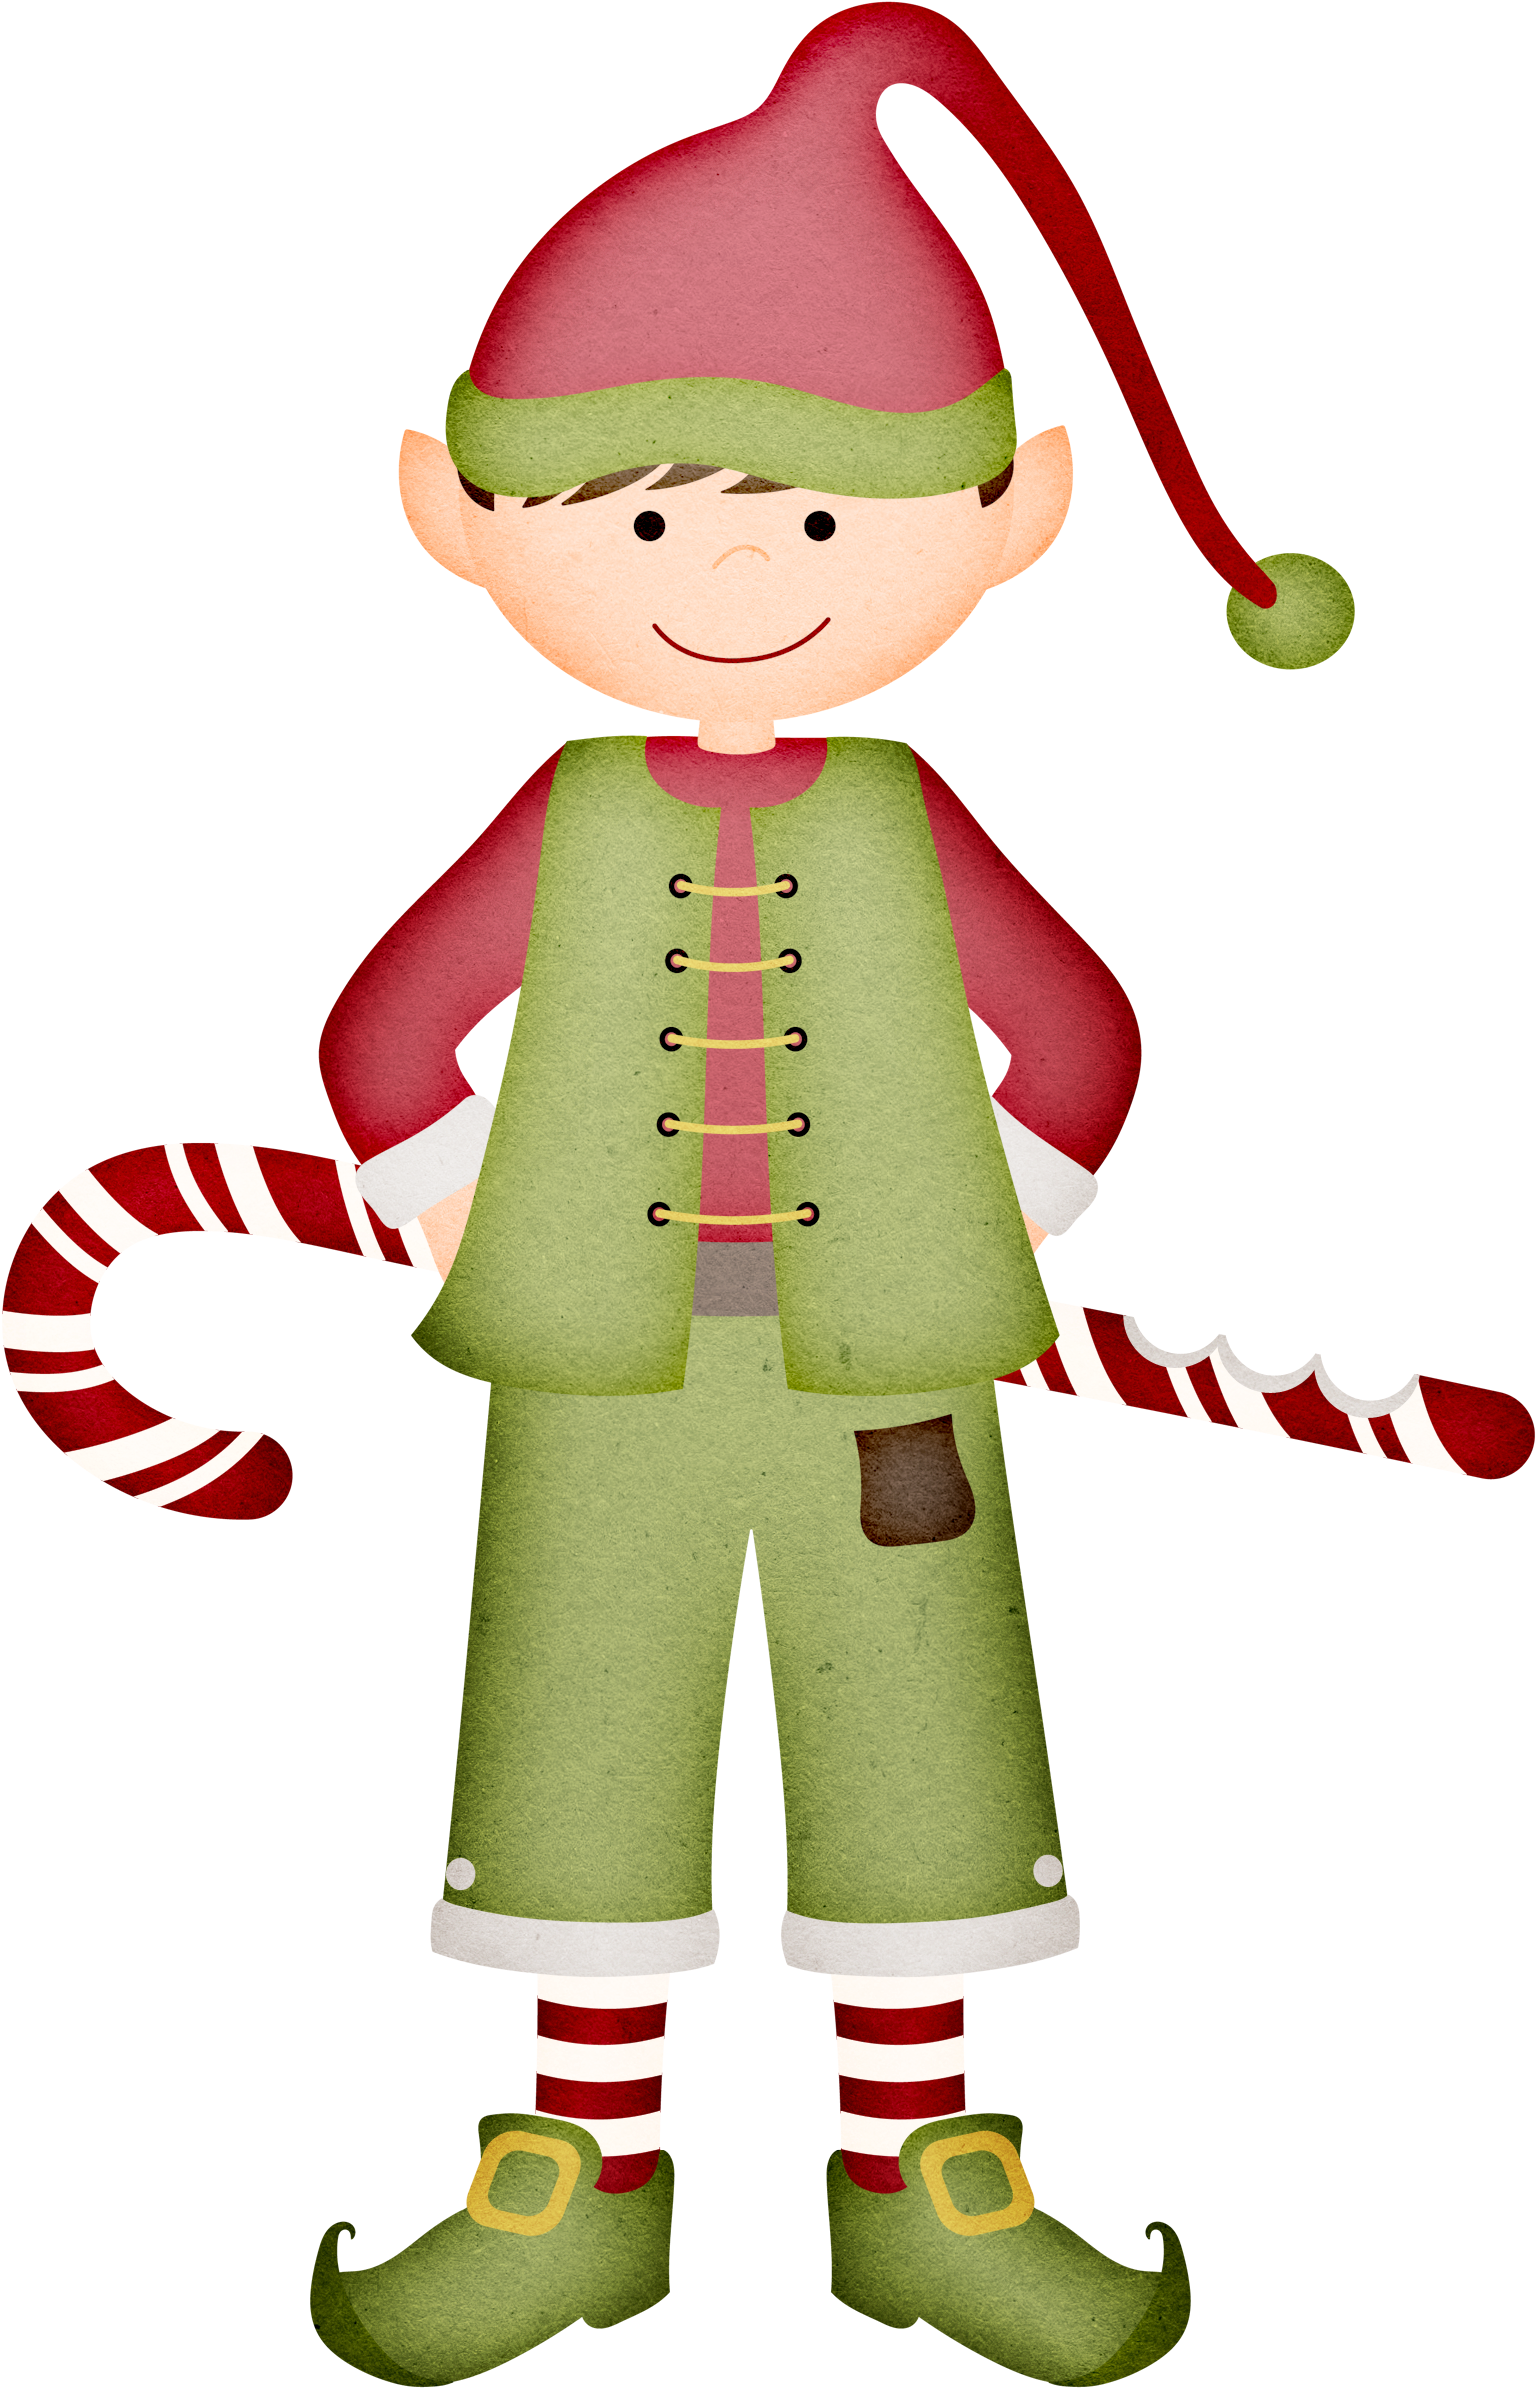 Find This Pin And More On Clipart - Christmas Day (1617x2471)